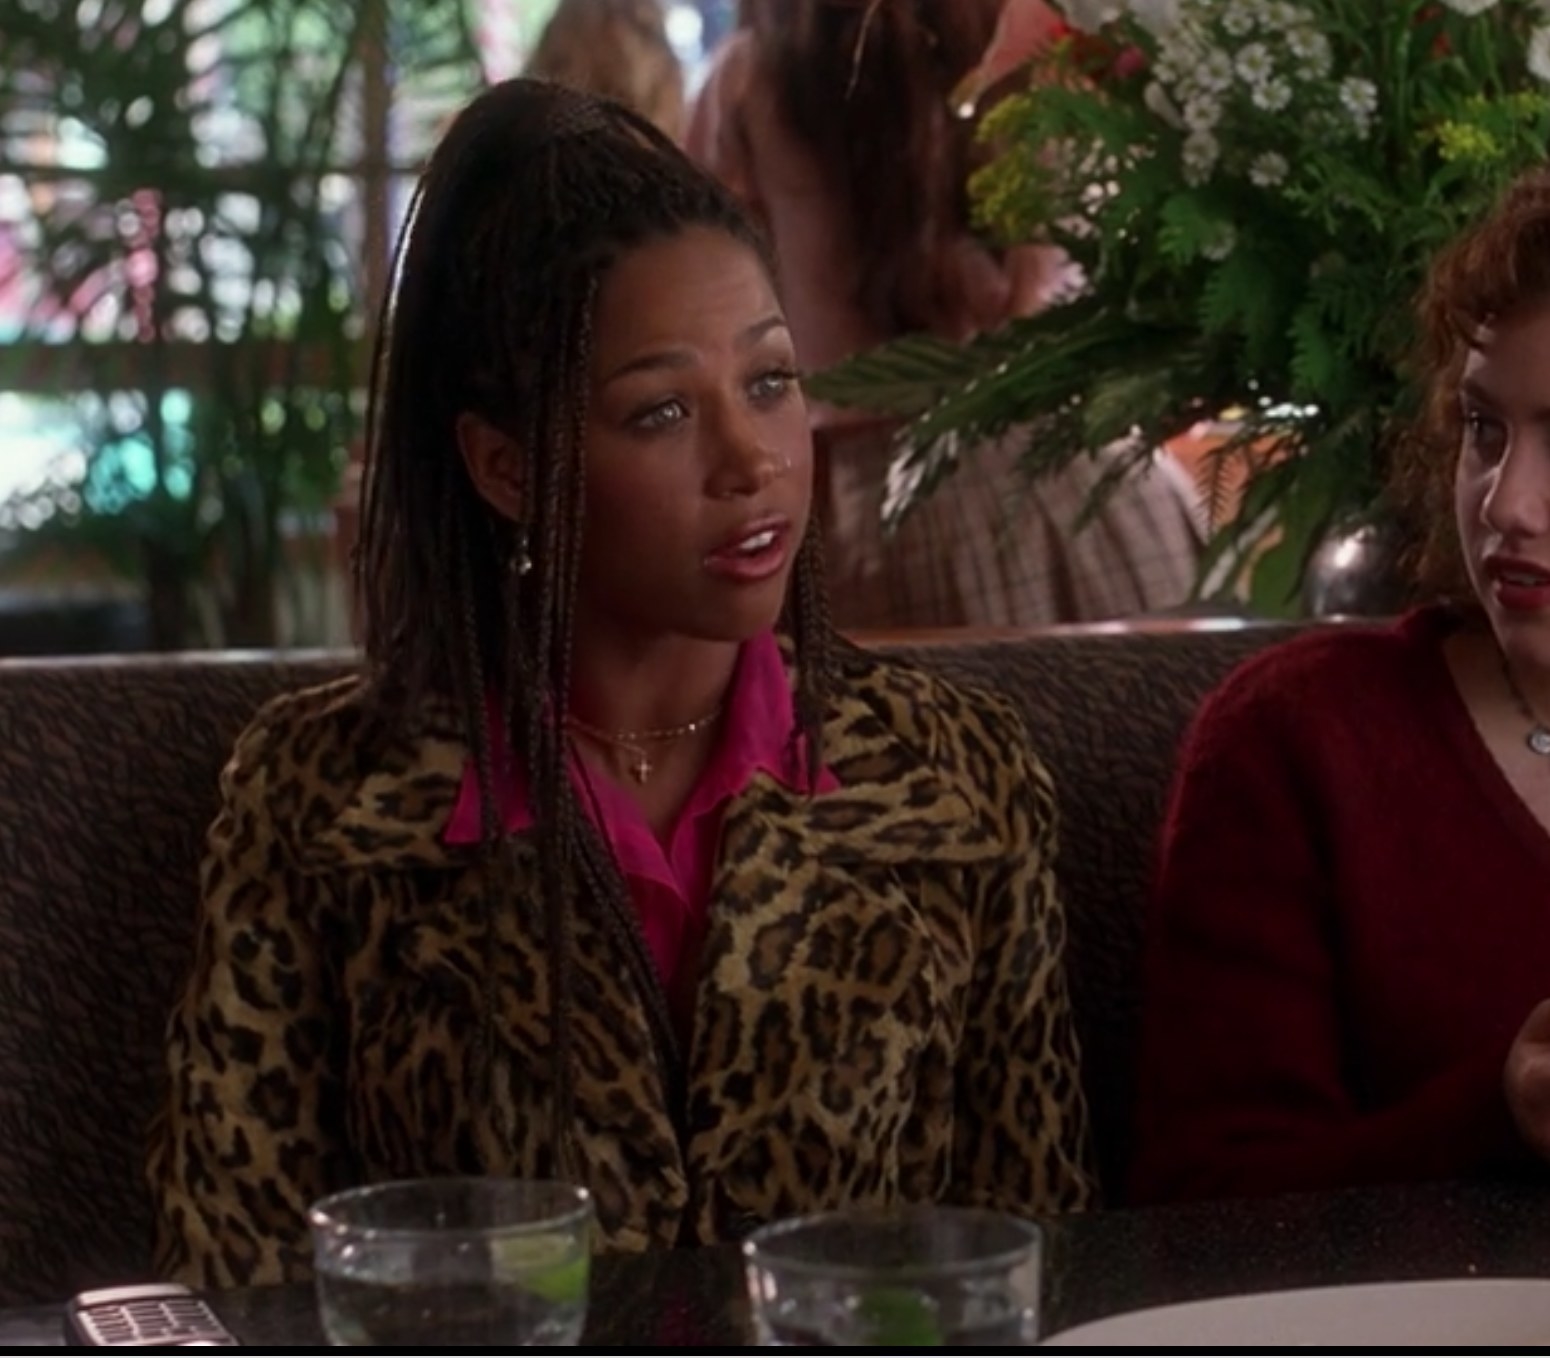 Dionne wears animal print while talking to Tai and Cher at a restaurant